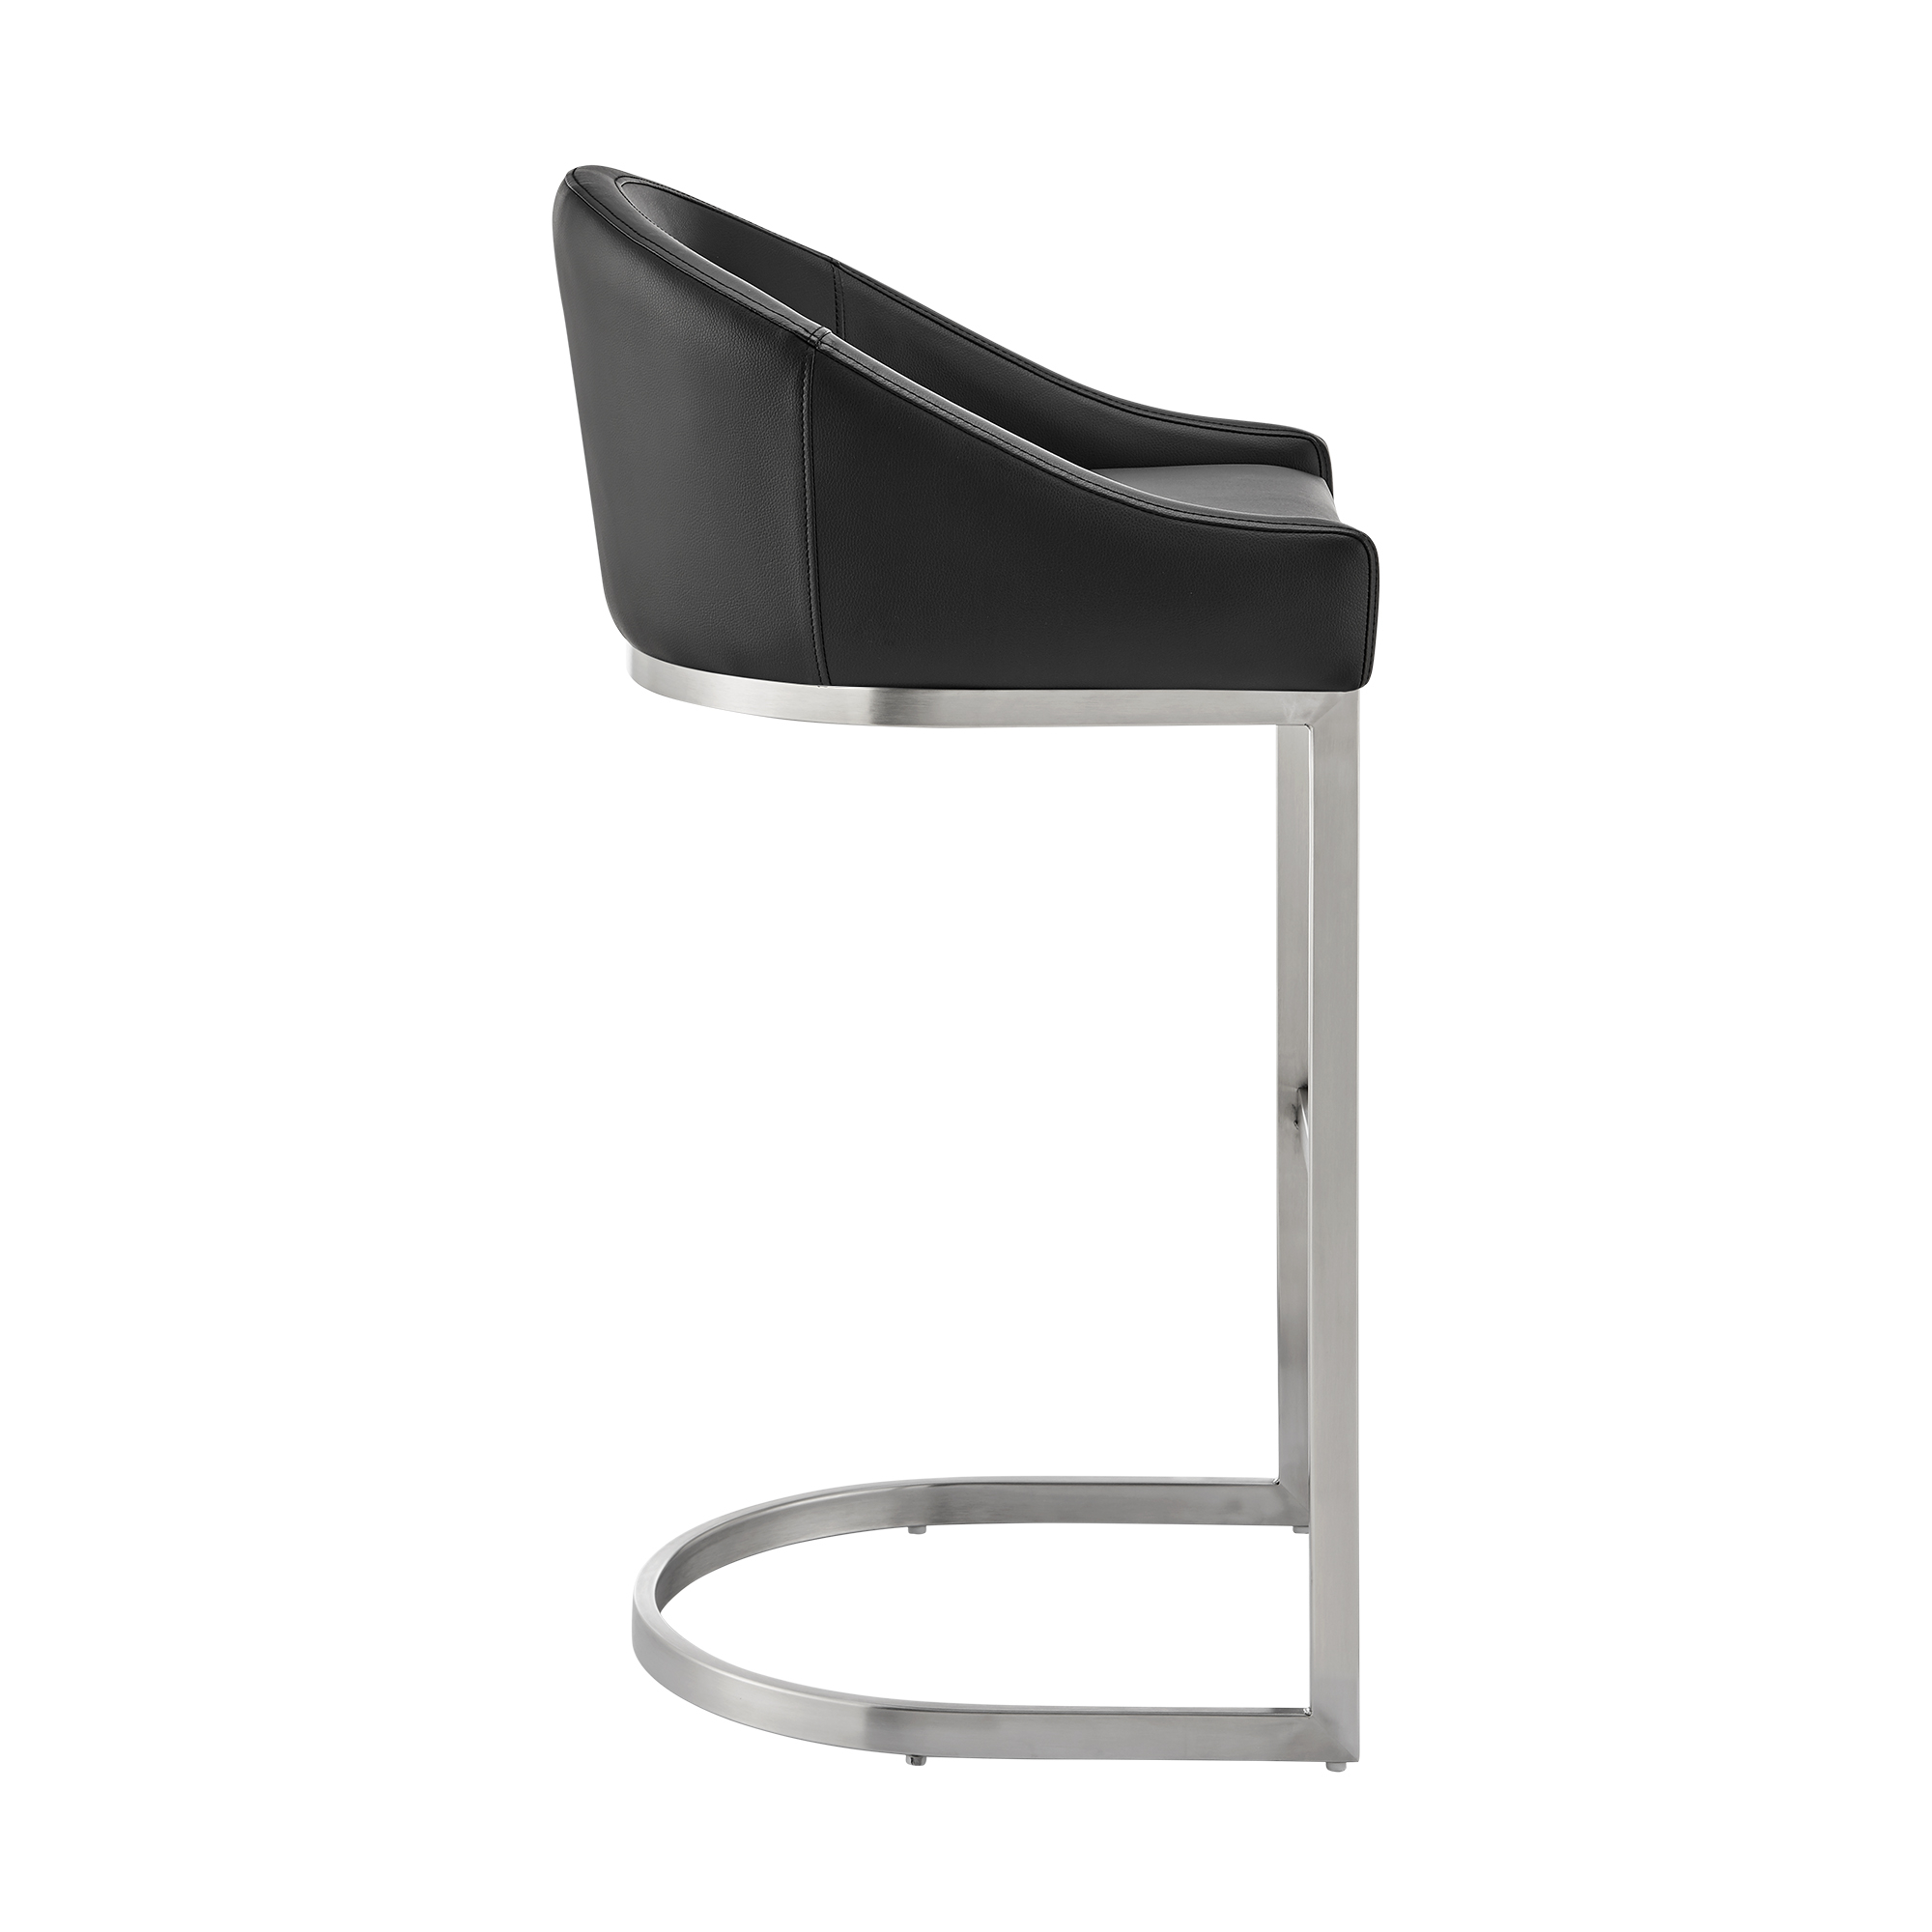 Lina 24 Inch Counter Stool Chair, Metal Cantilever Base, Black Faux Leather- Saltoro Sherpi